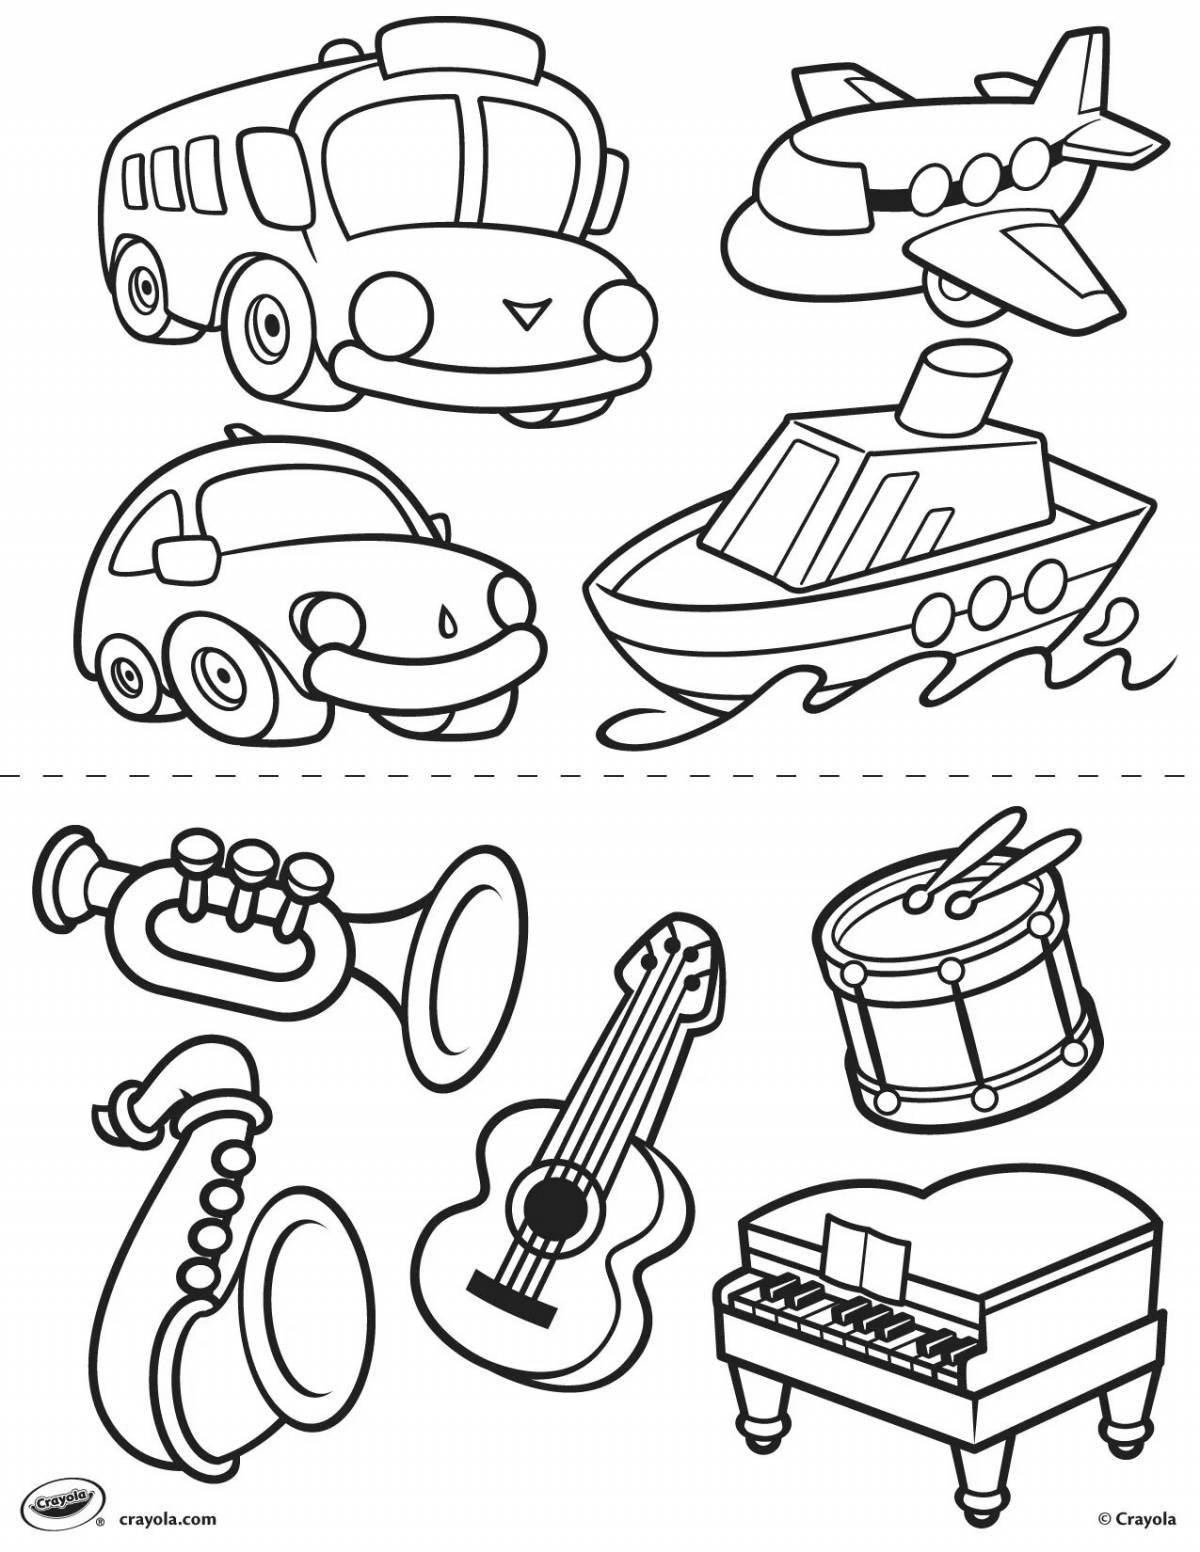 Shining Transport coloring page